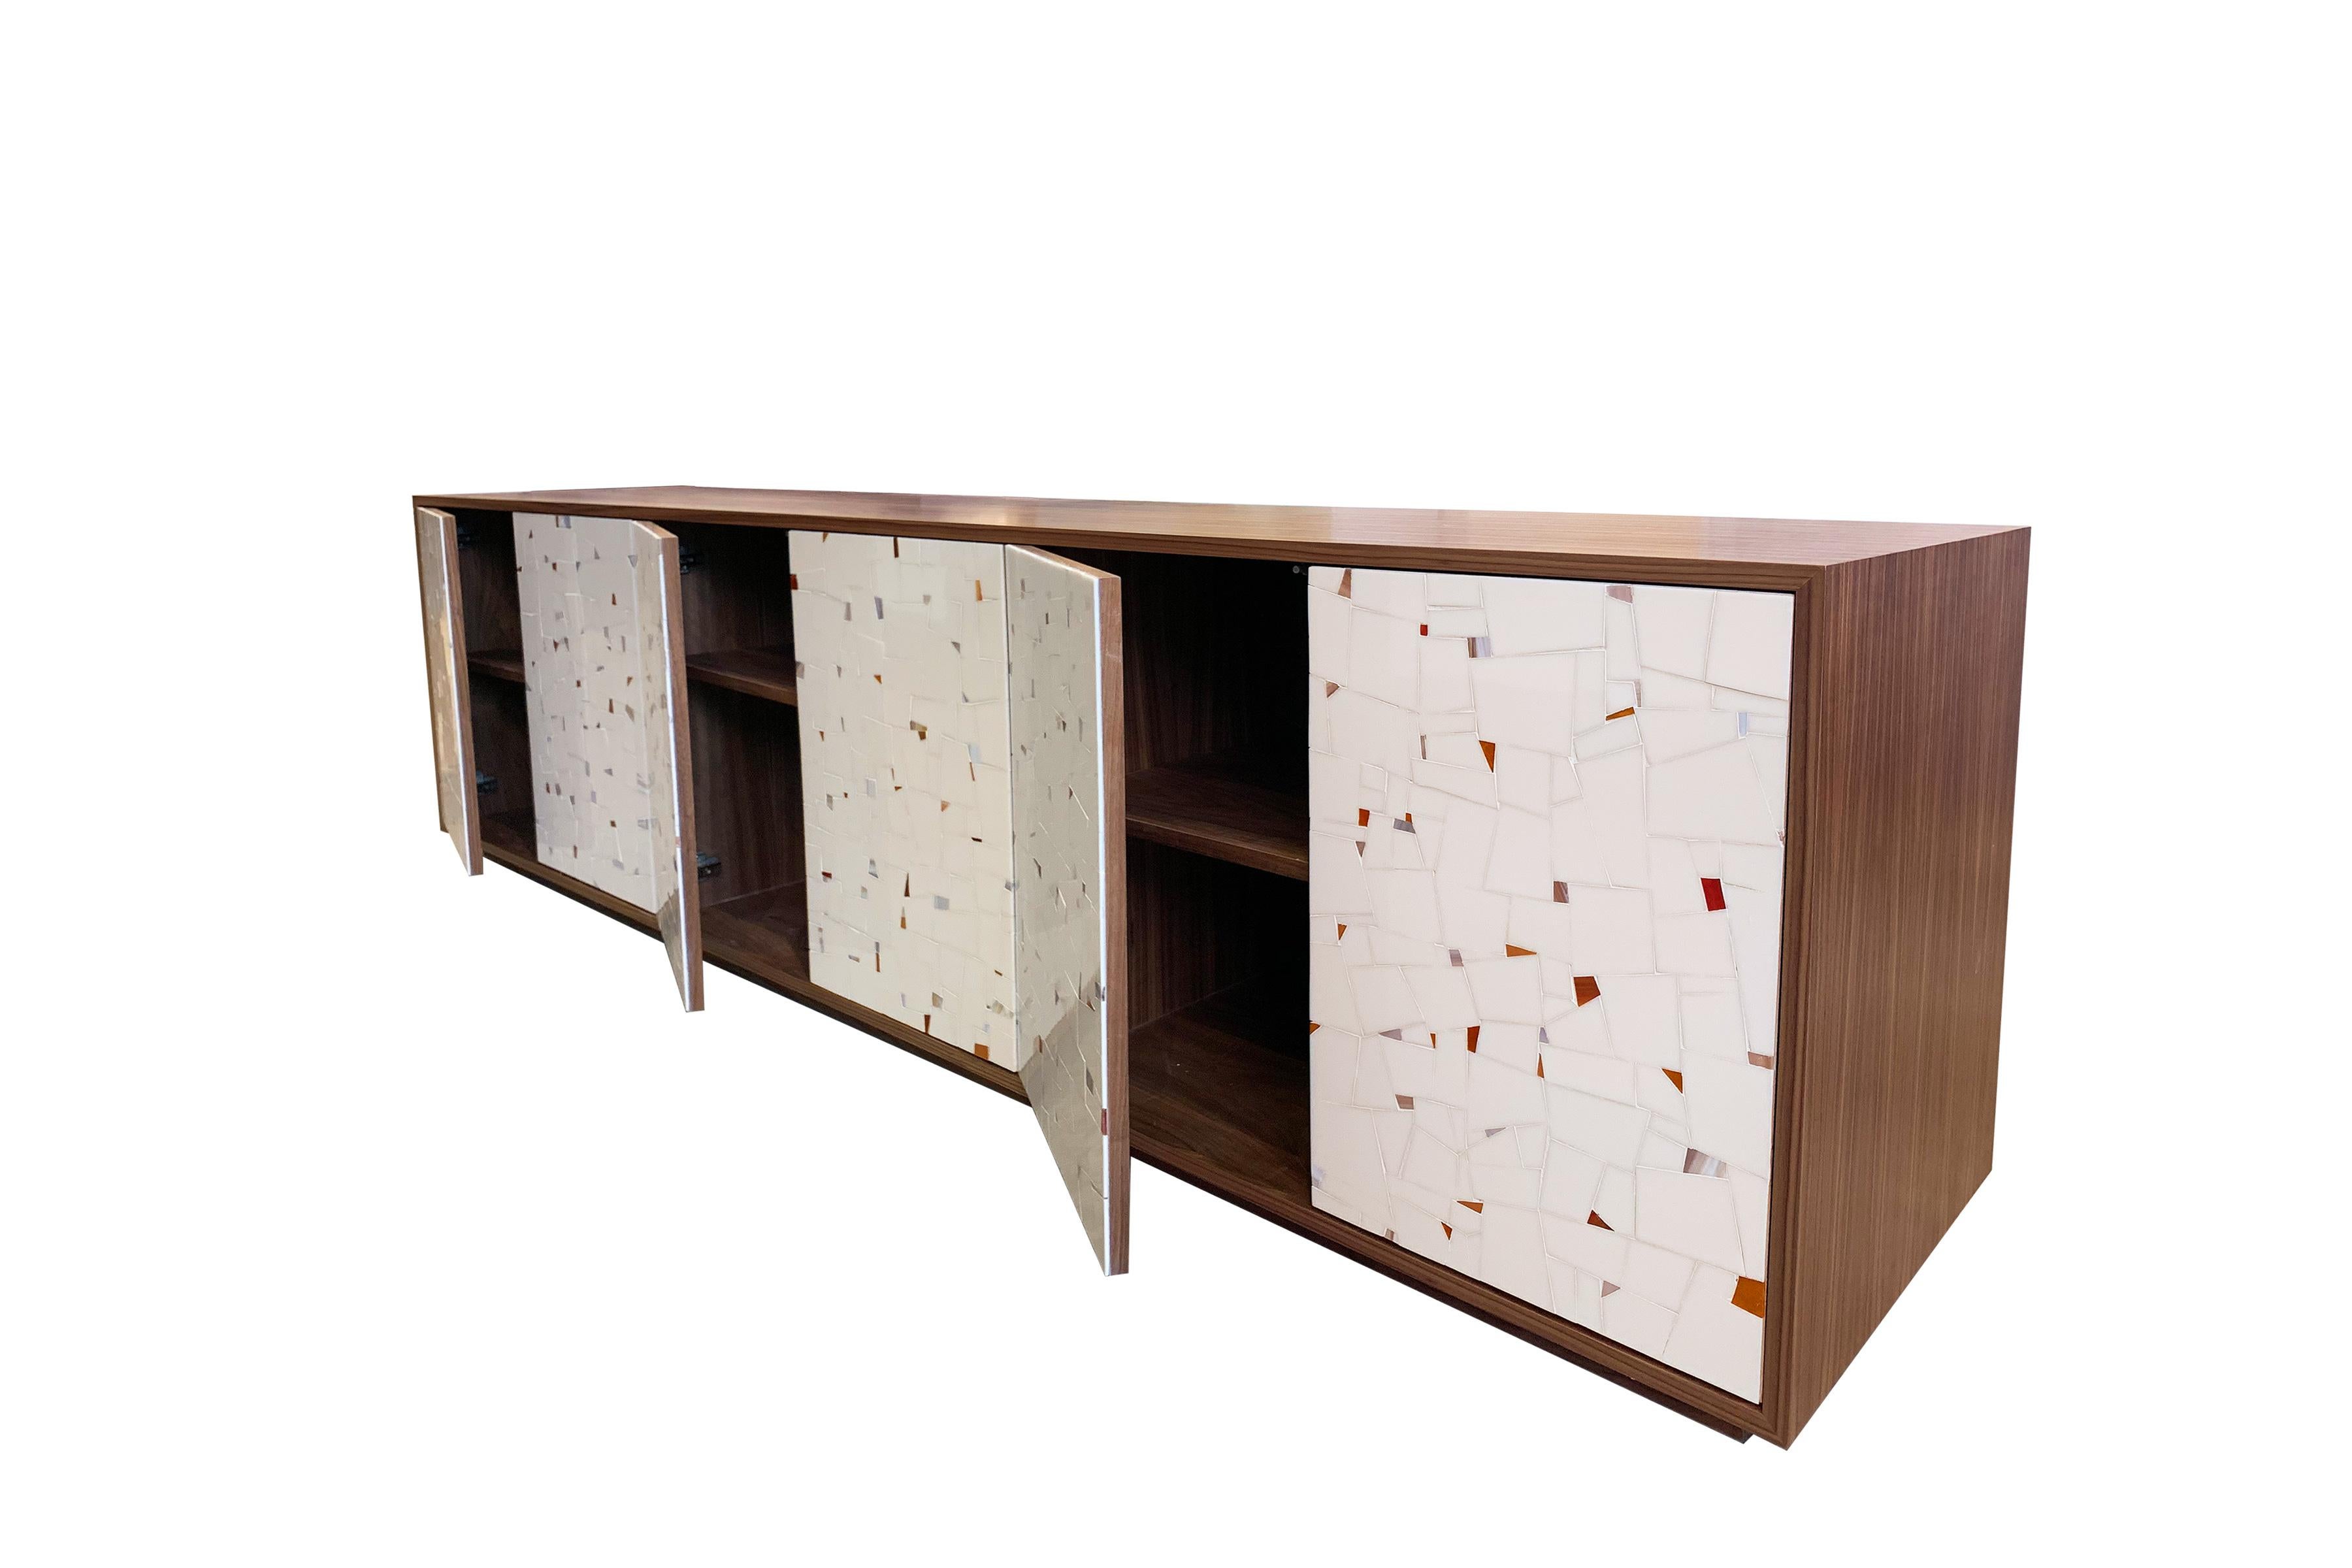 The platform buffet by Ercole Home has a 6-door front, with a natural wood finish on Walnut. Handcut glass mosaics in Light ivory/pink glass mosaic decorate the surface in a continuous Terrazzo pattern. 
There is one adjustable interior shelf in